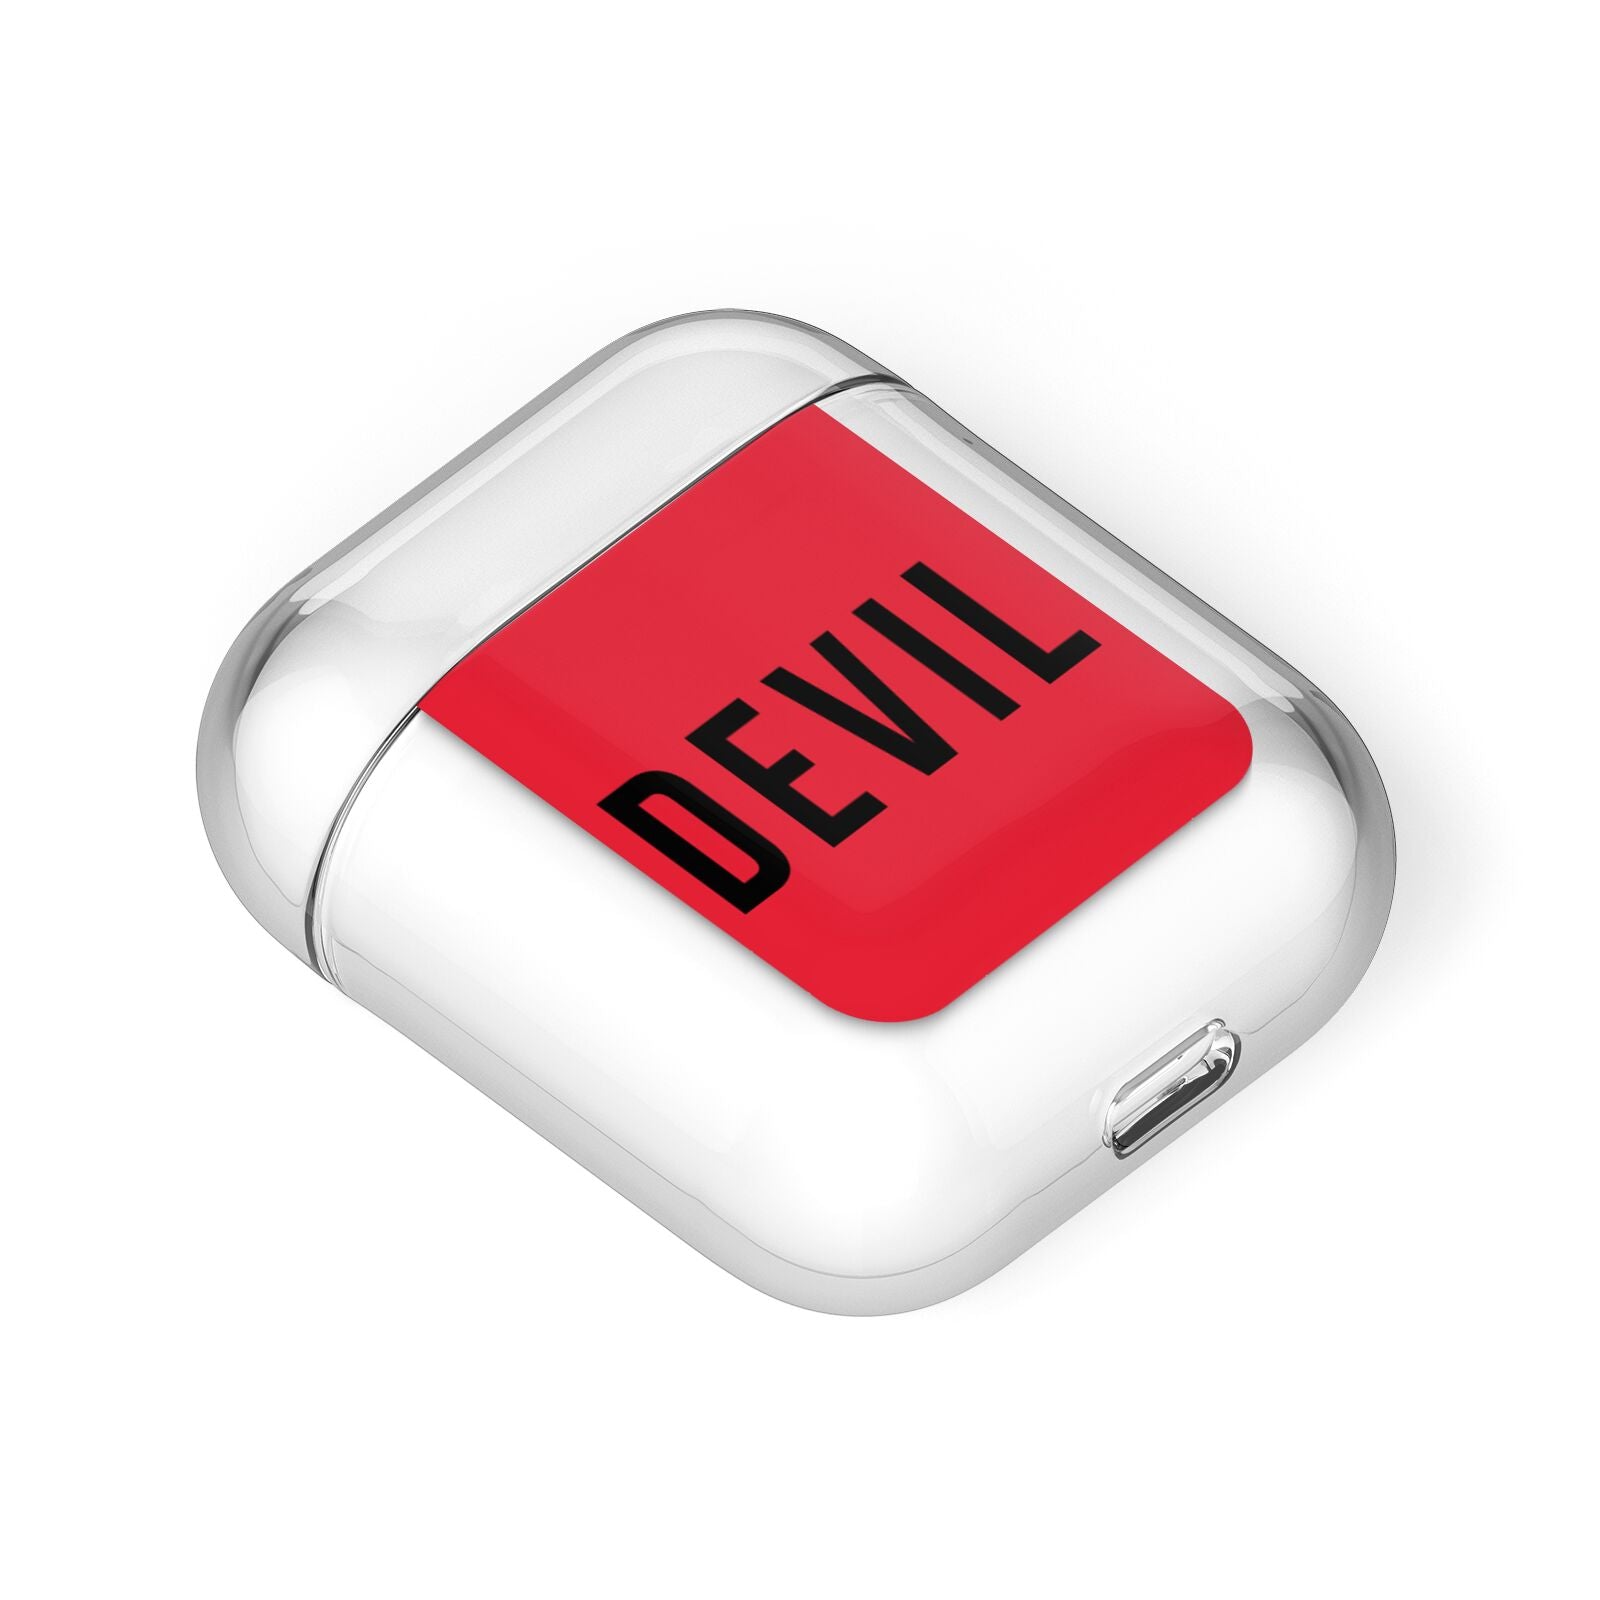 Halloween Red Devil AirPods Case Laid Flat